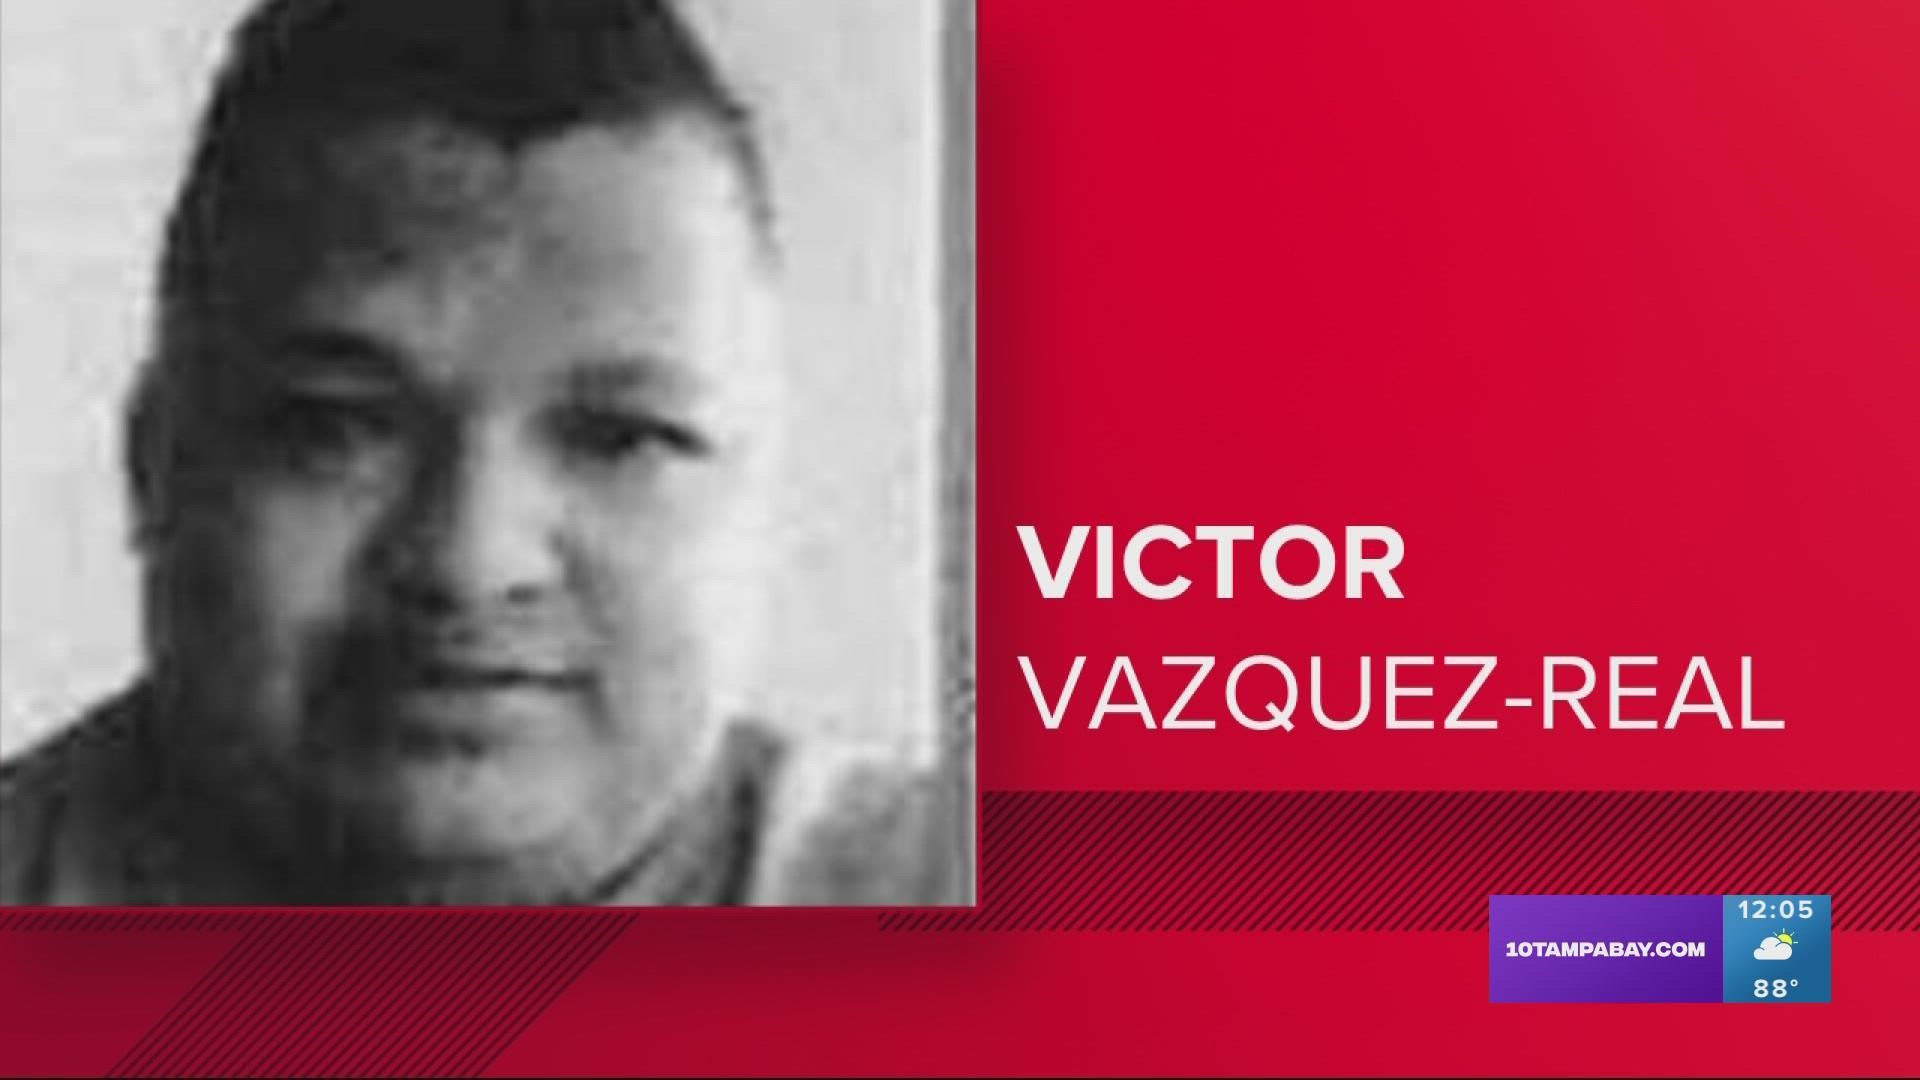 Victor Vazquez-Real, 35, is suspected to be responsible for the incident.